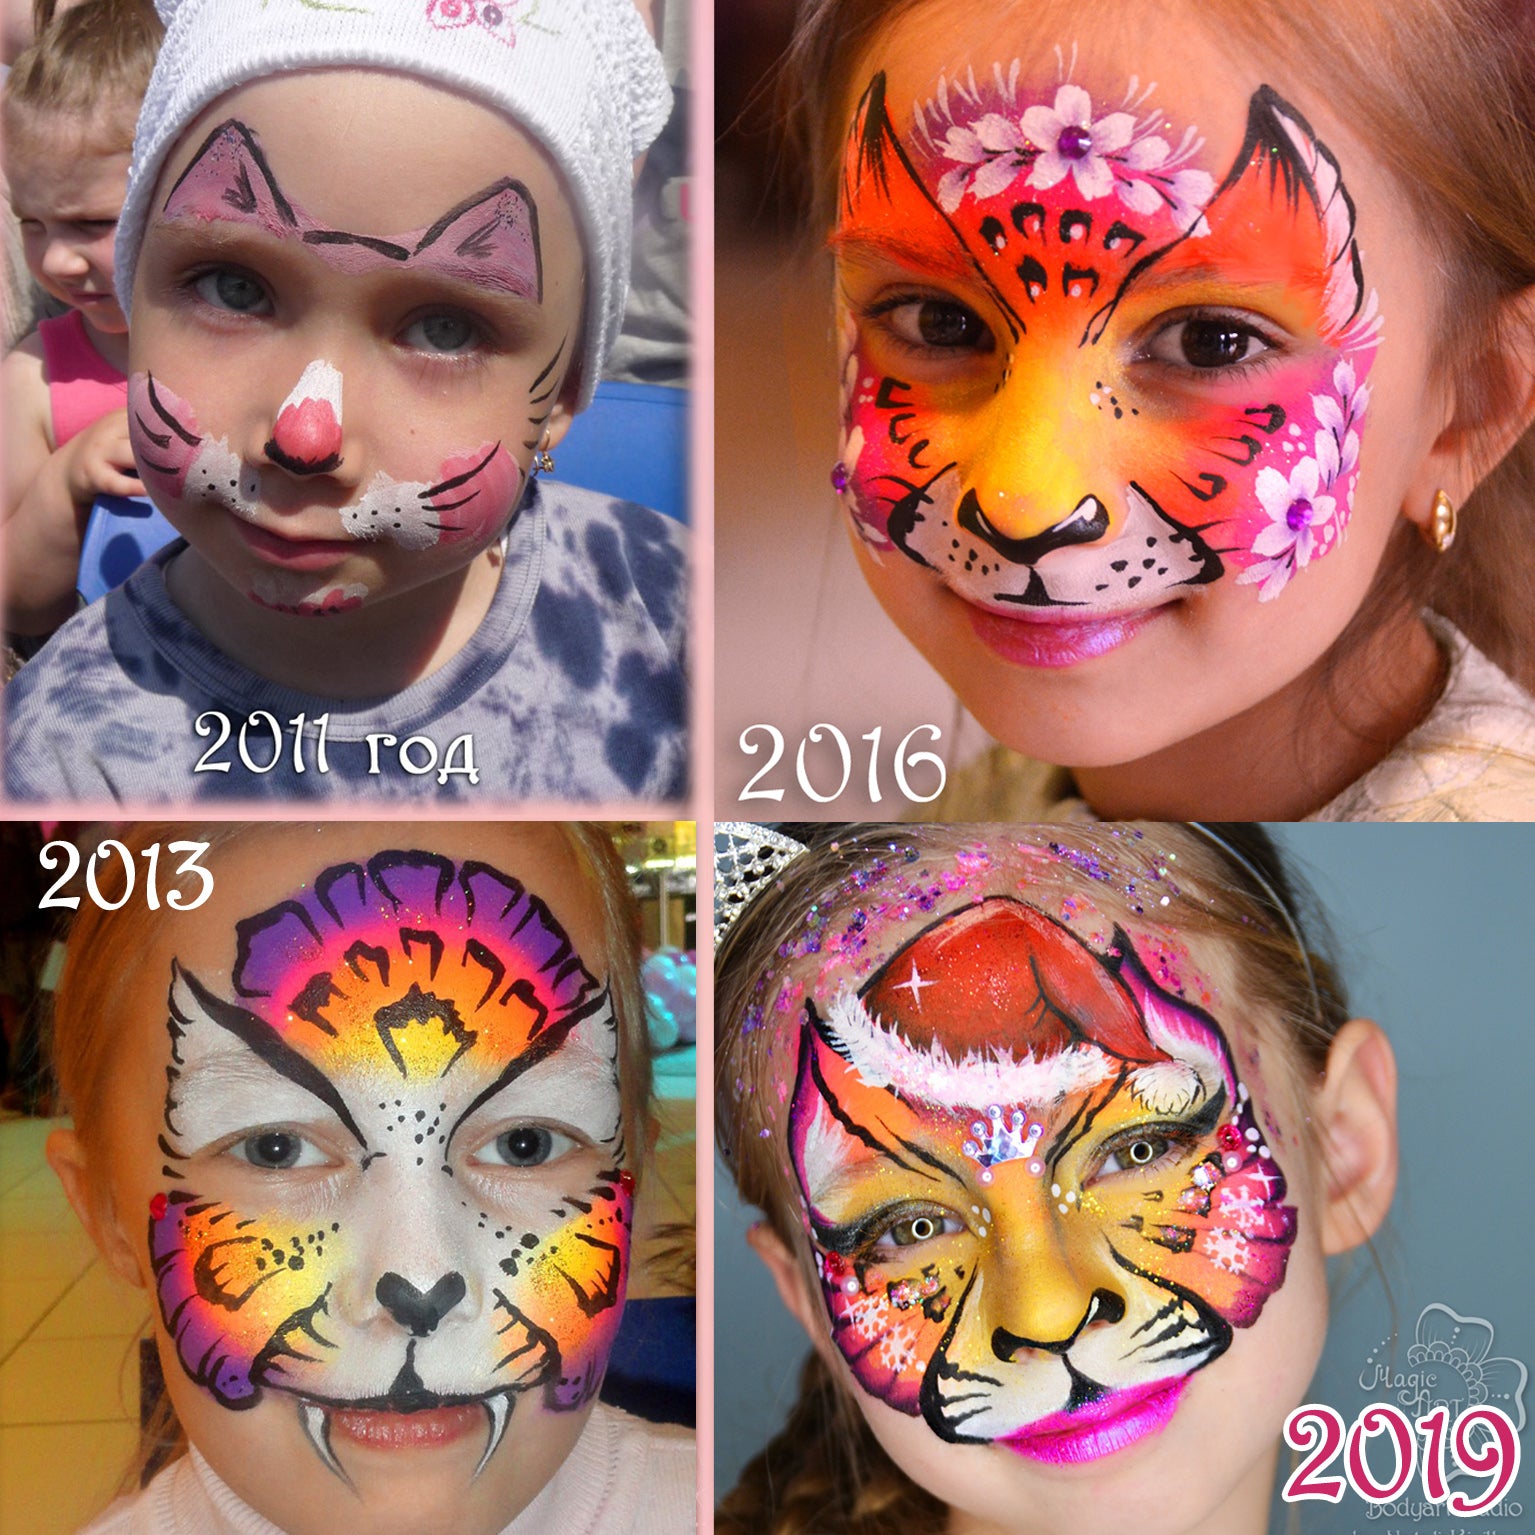 Facepainting "Then and Now!" by Natalia Kirillova